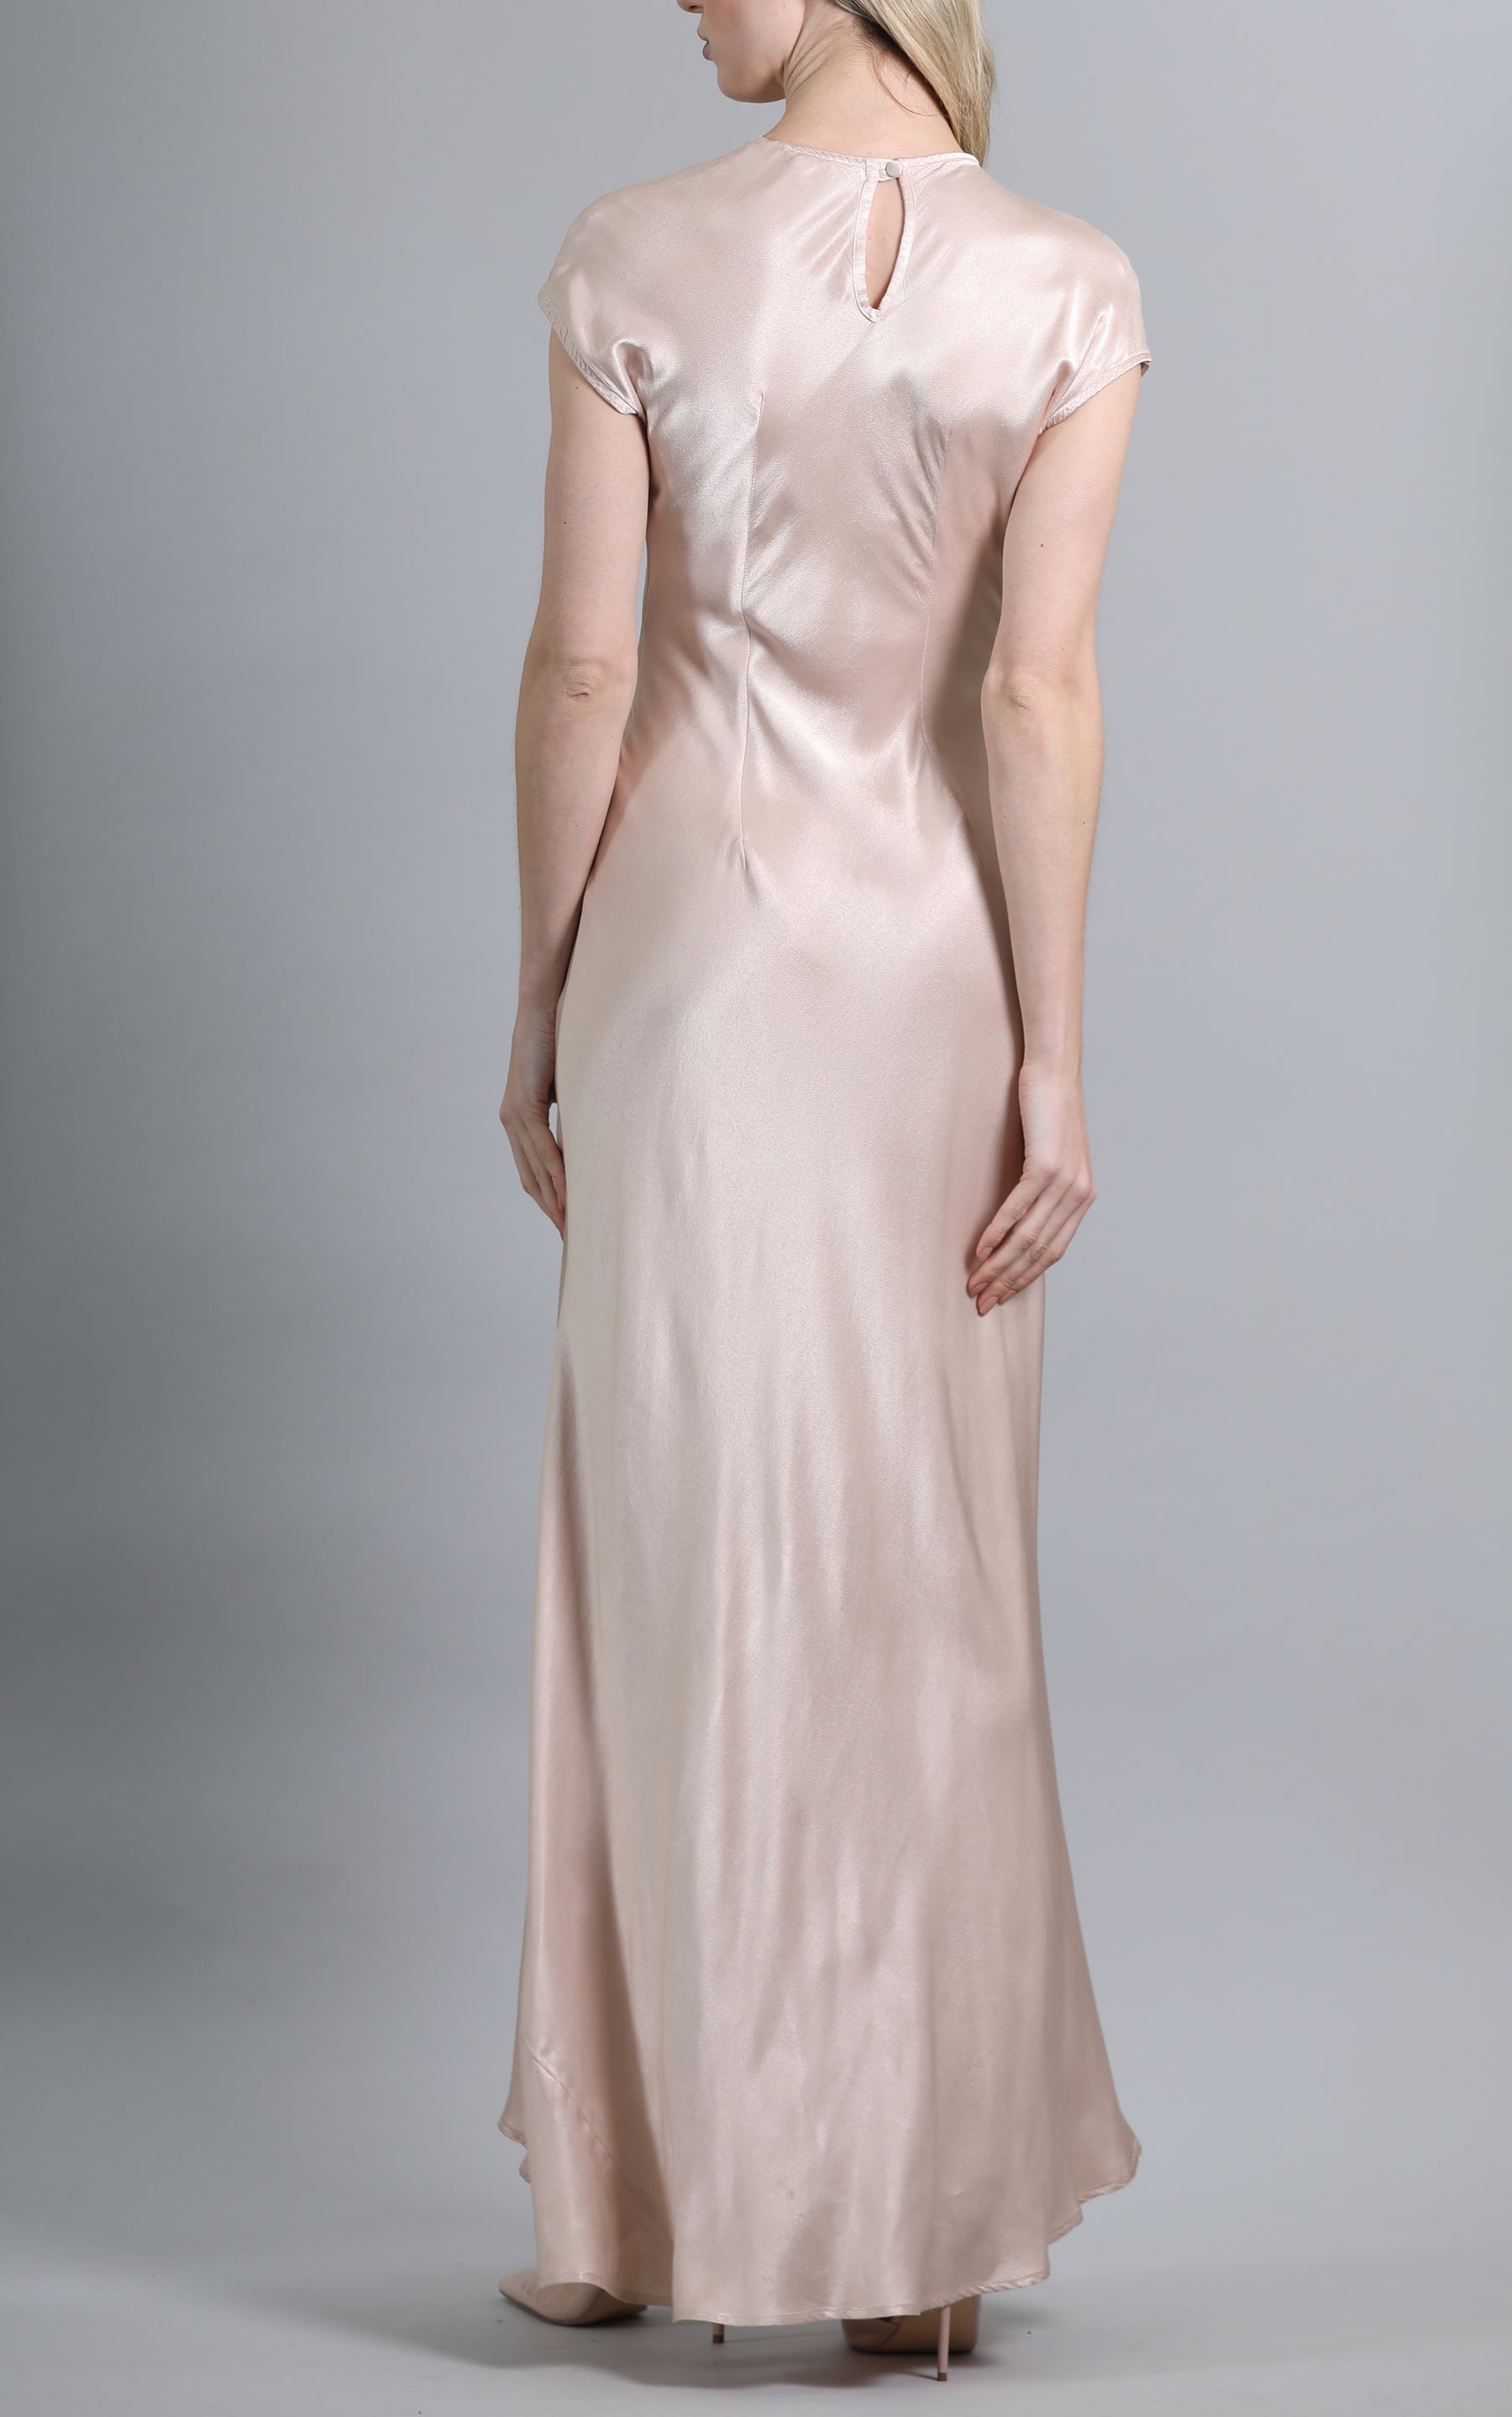 Capped Sleeve Satin Maxi Dress with Knot Front